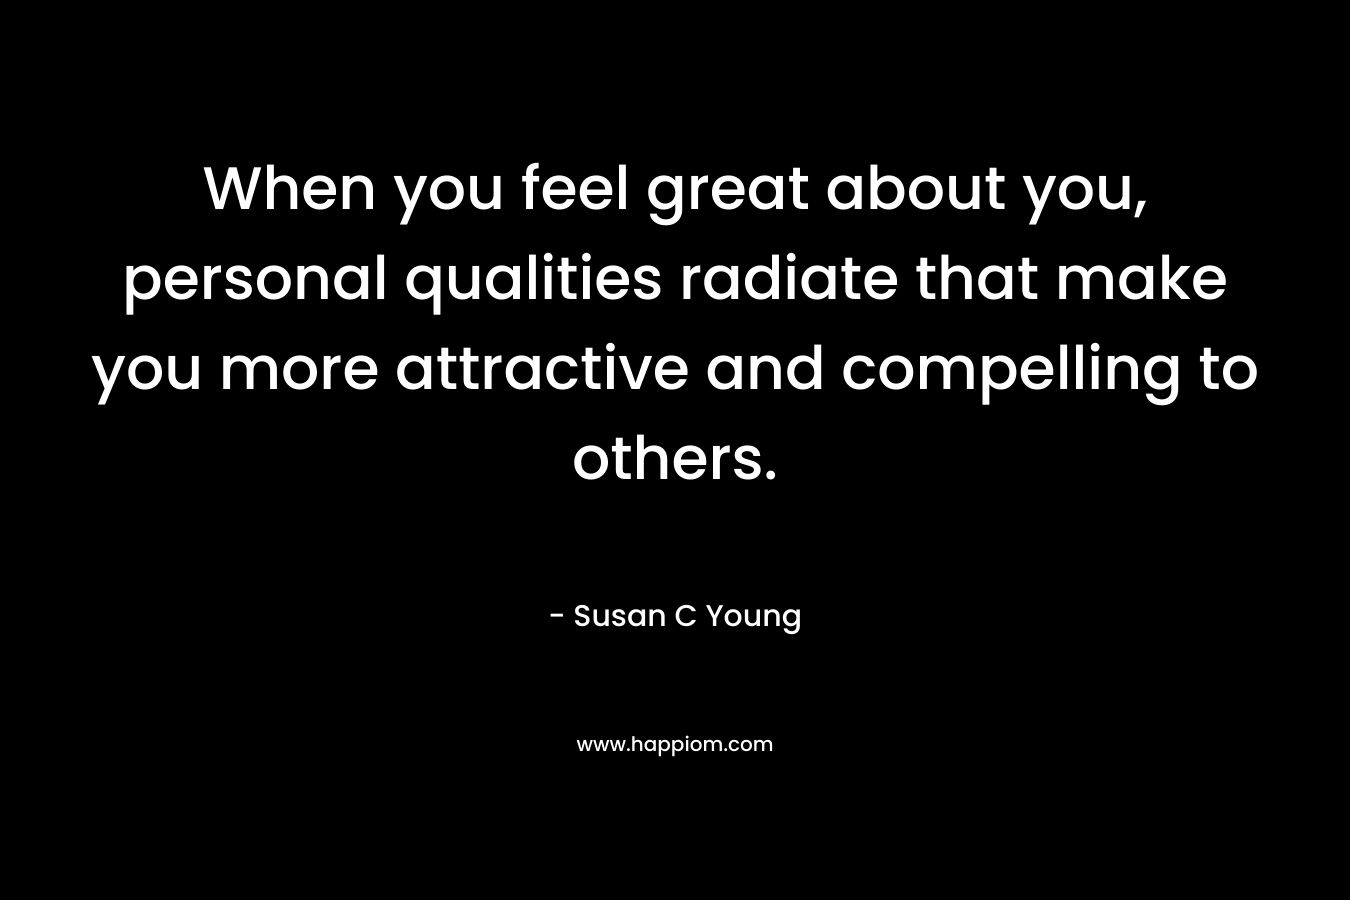 When you feel great about you, personal qualities radiate that make you more attractive and compelling to others.